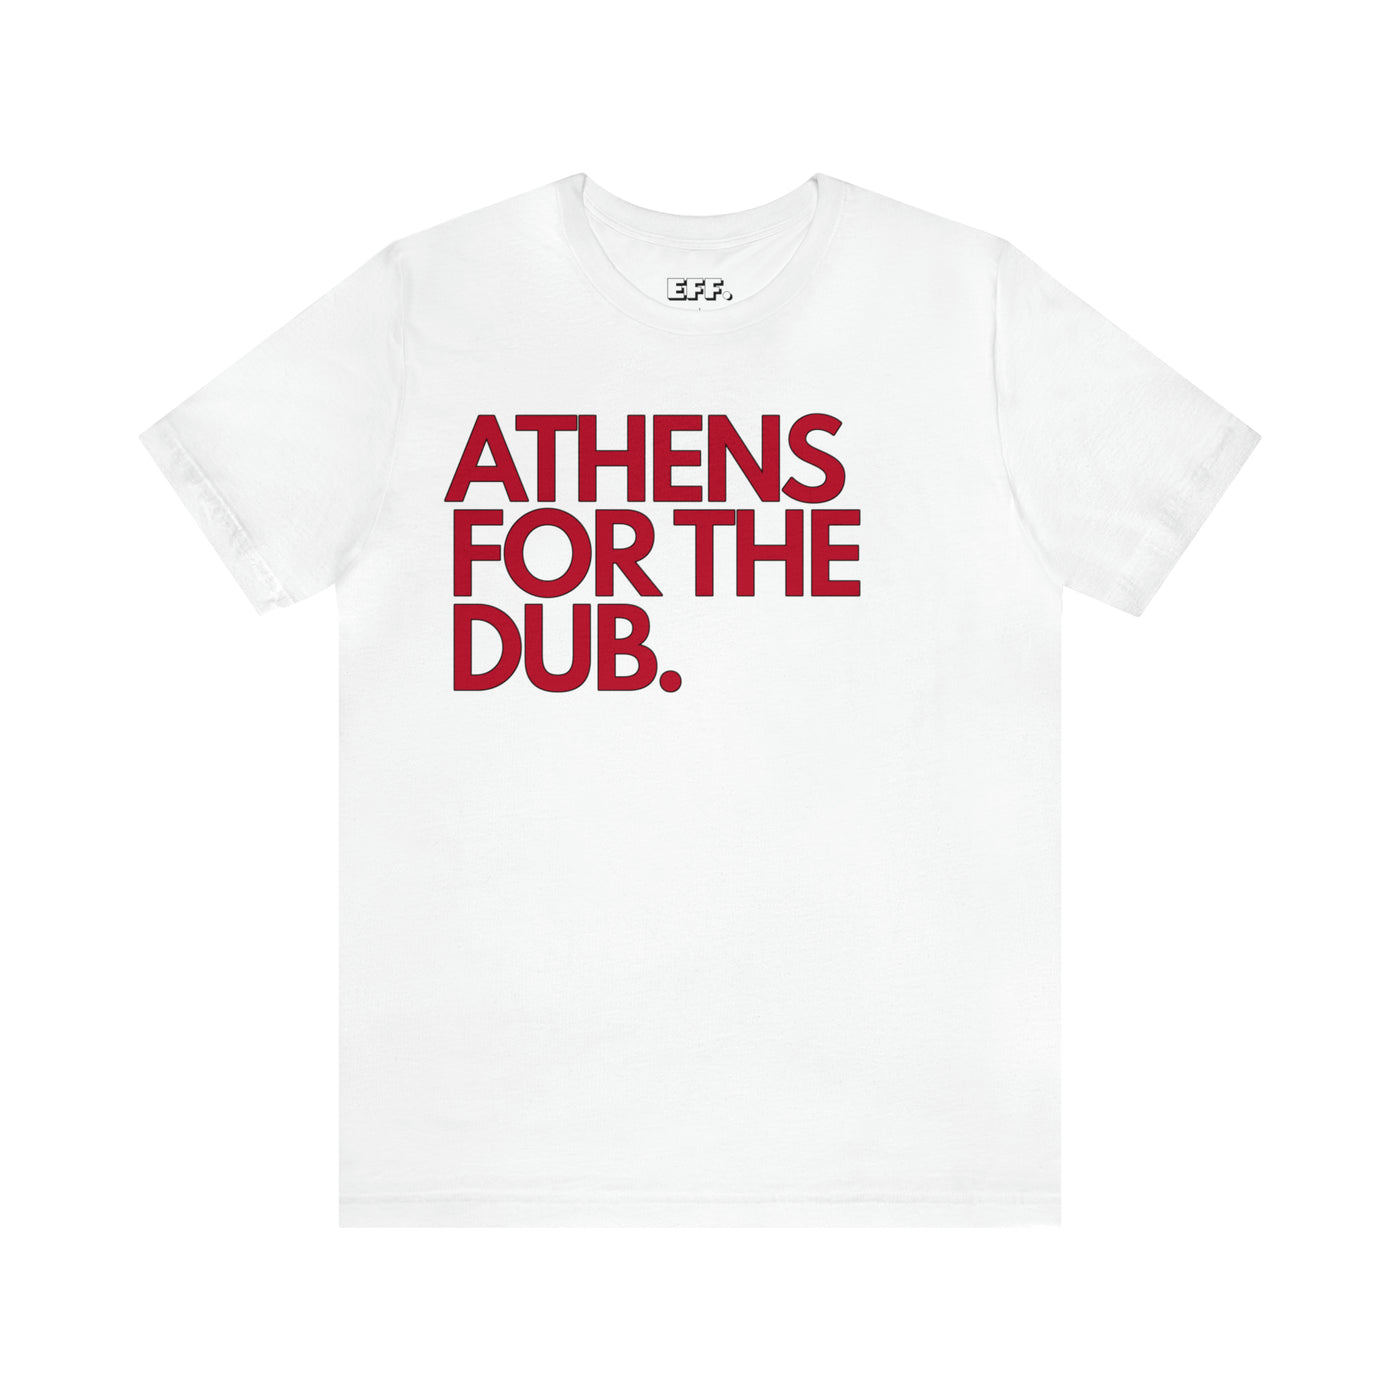 Athens For The Dub.